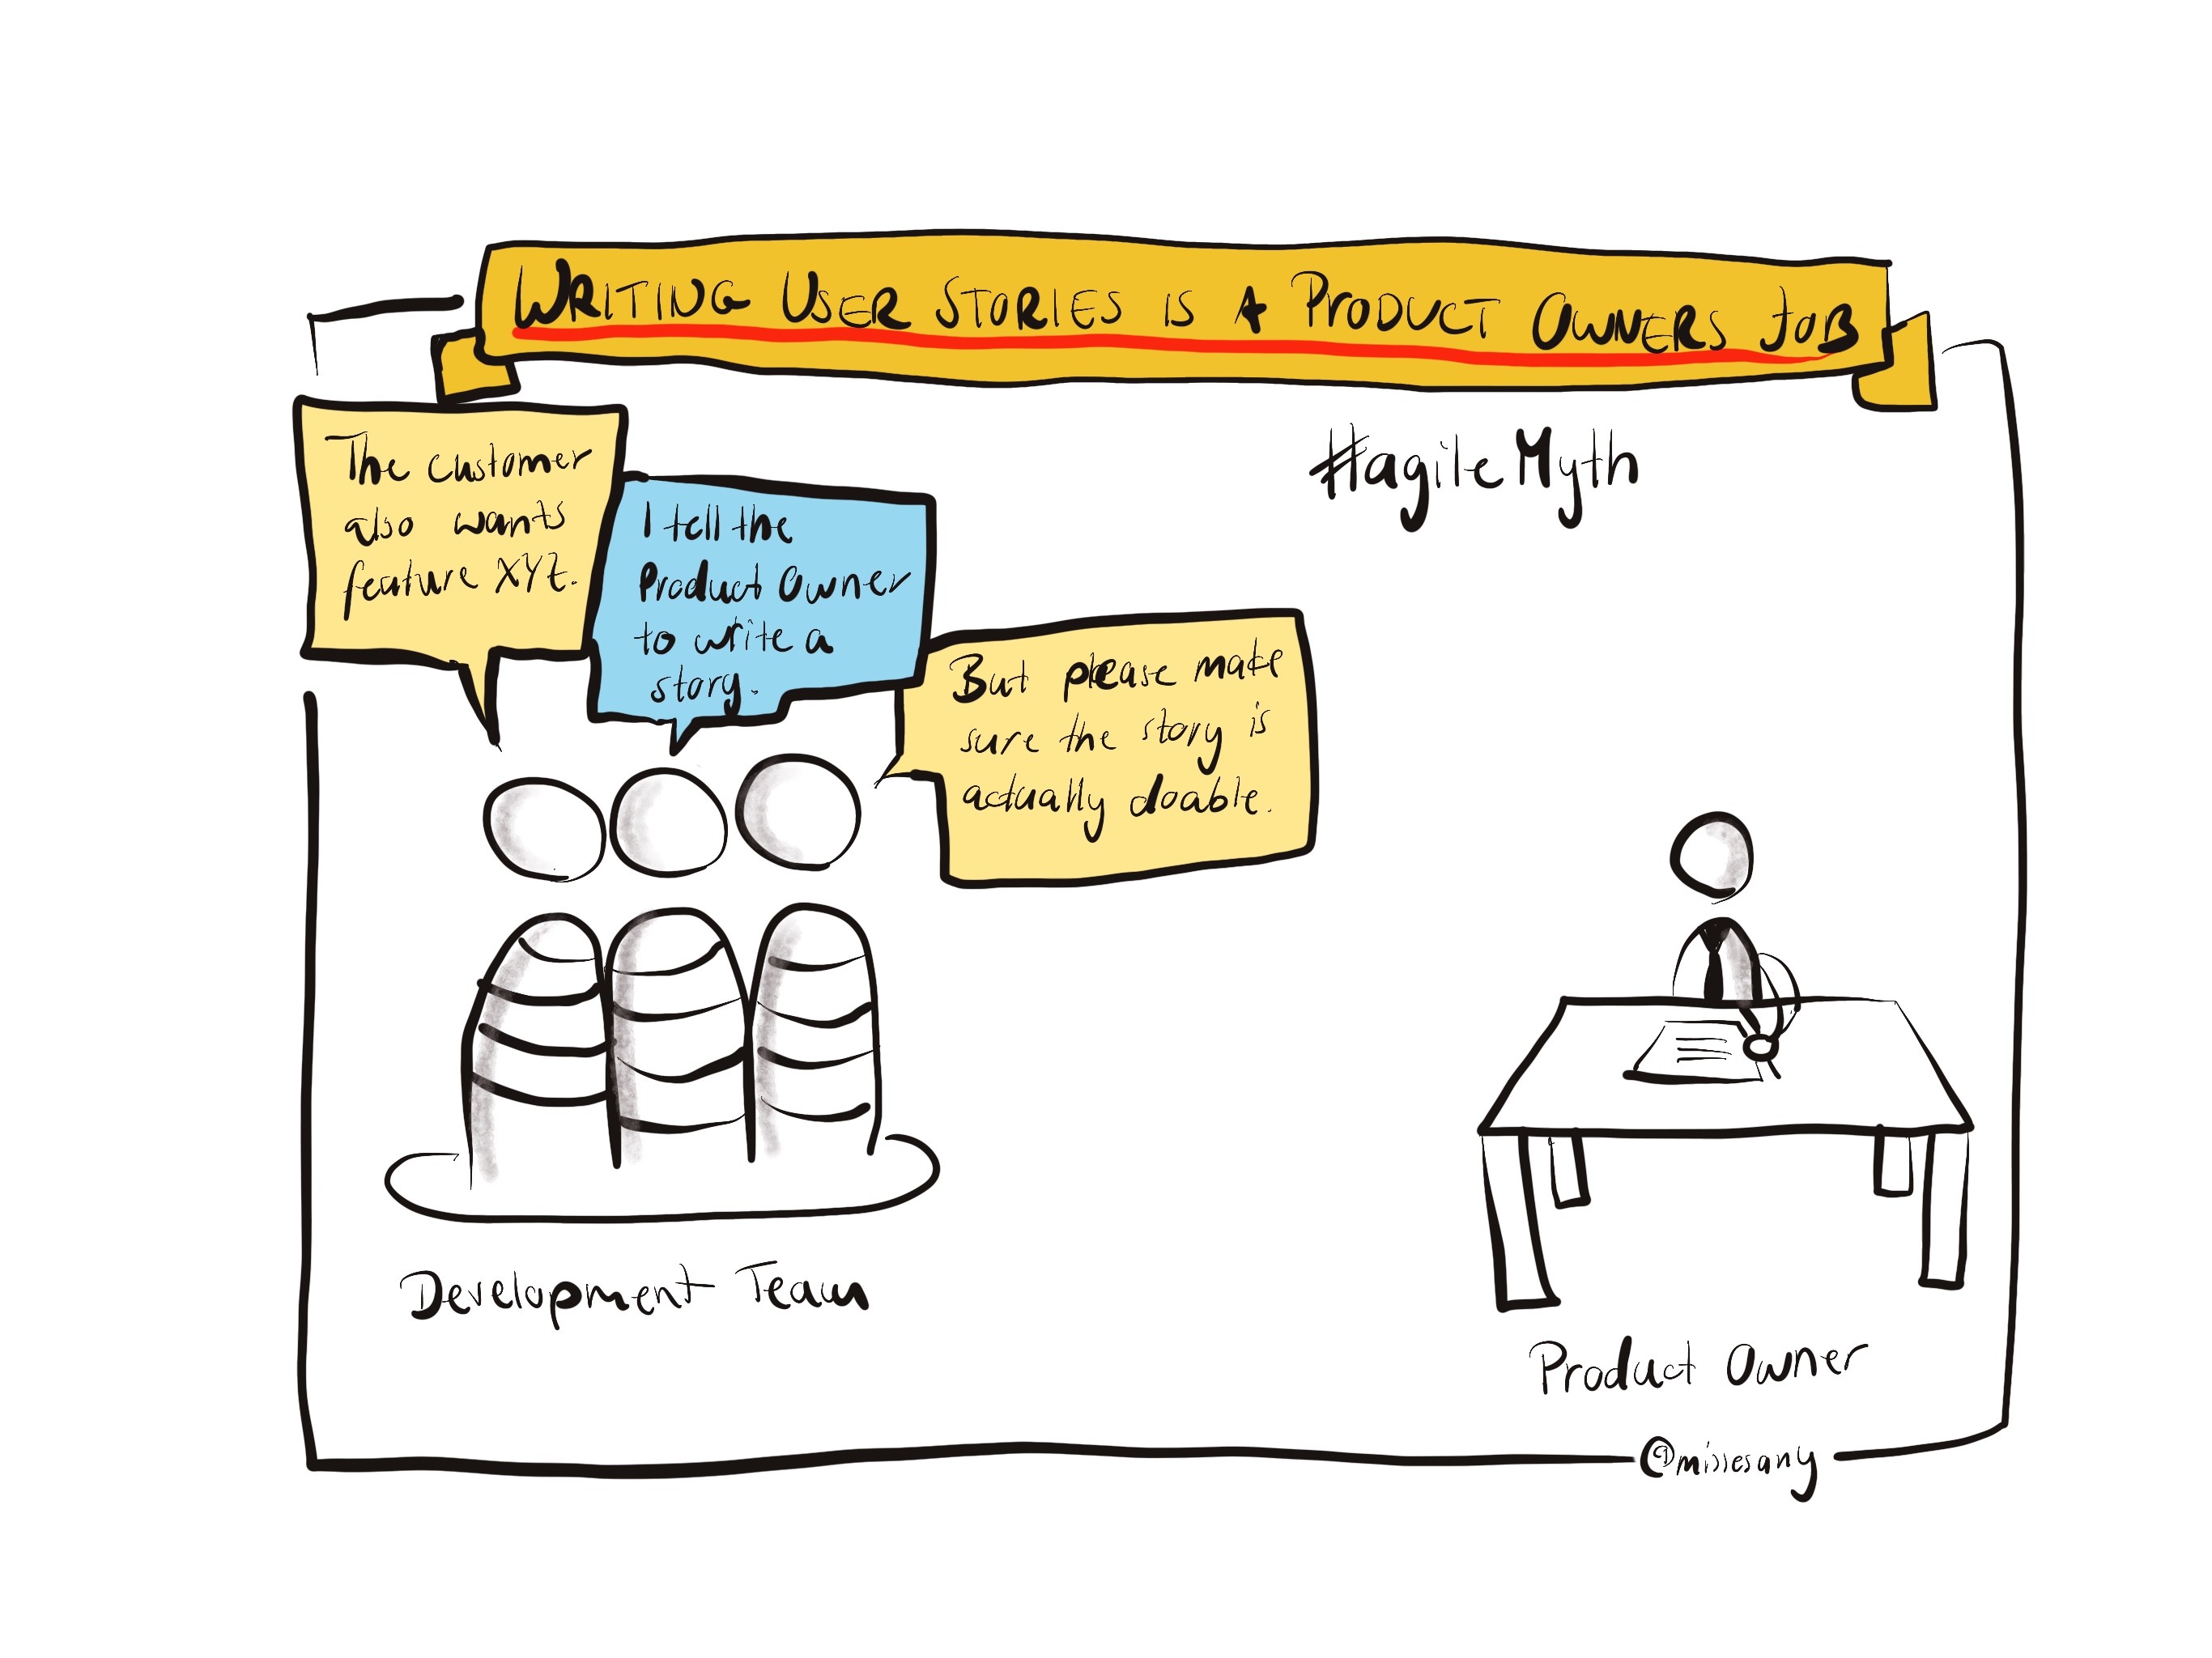 Agile myth: Writing user stories is Product Owner work  wibas blog